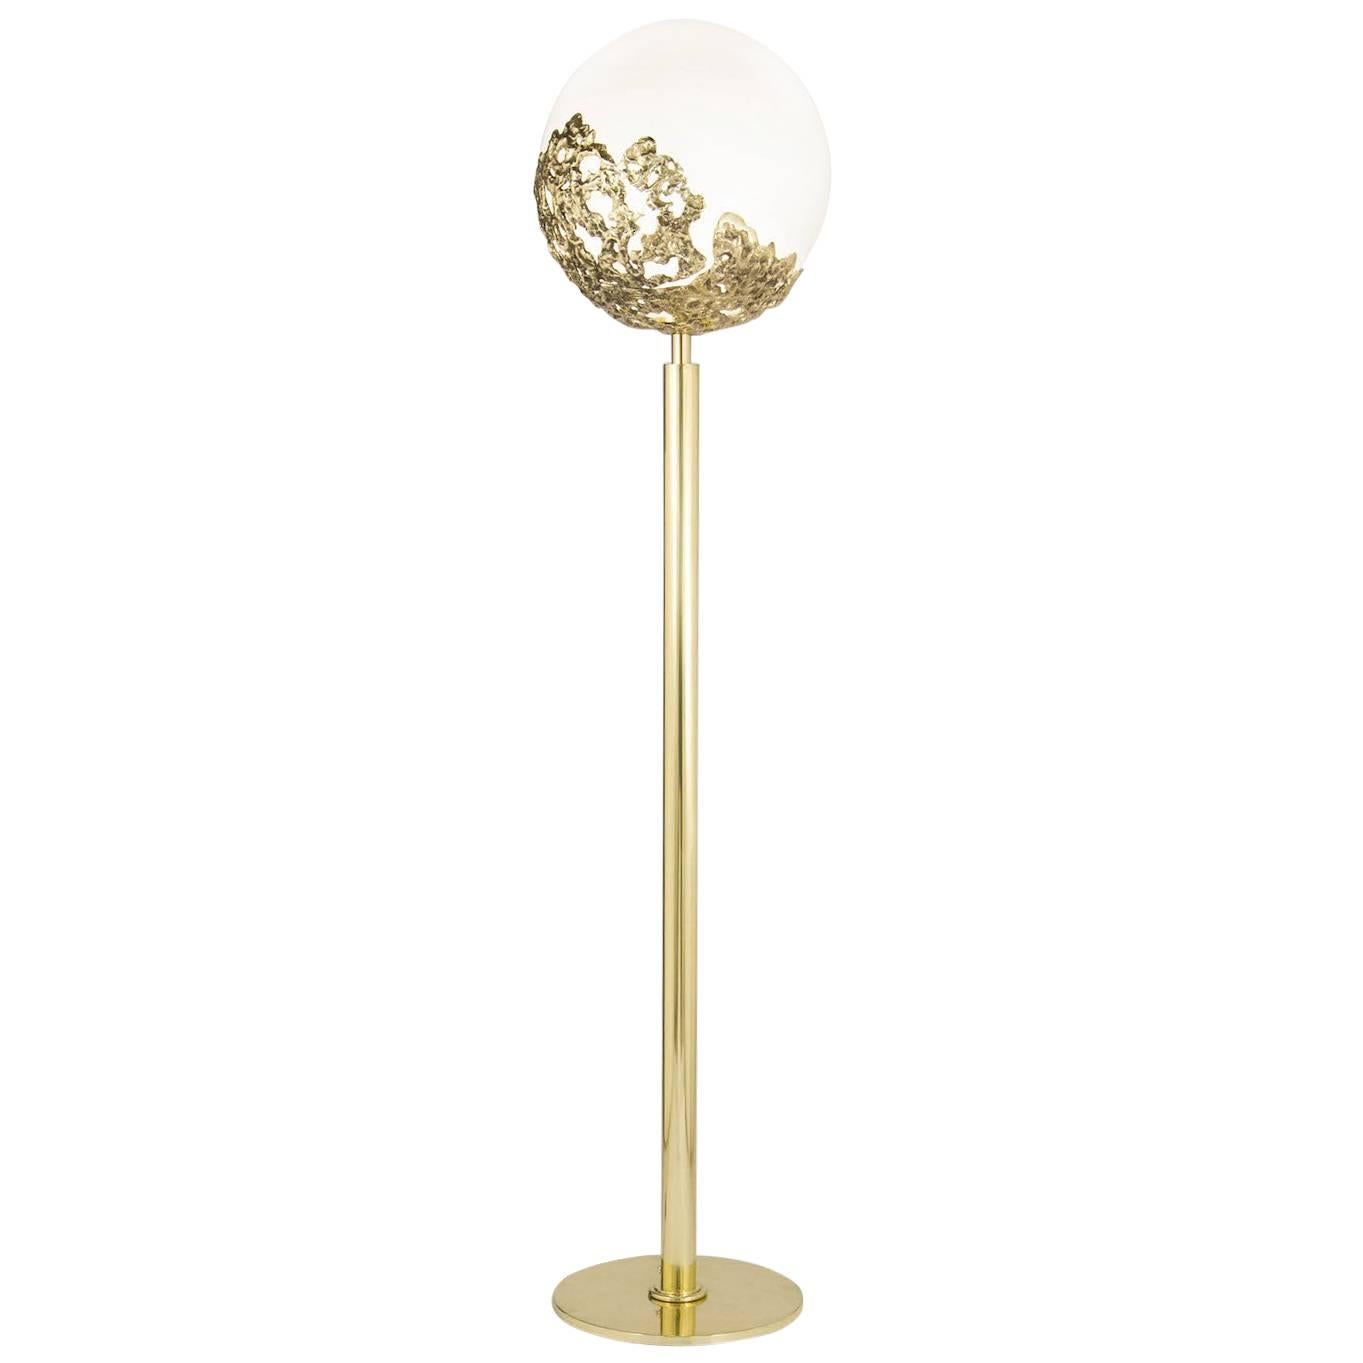 'Lucilla' Brass Floor Lamp, by Angelo Brotto for Esperia, 1970 For Sale